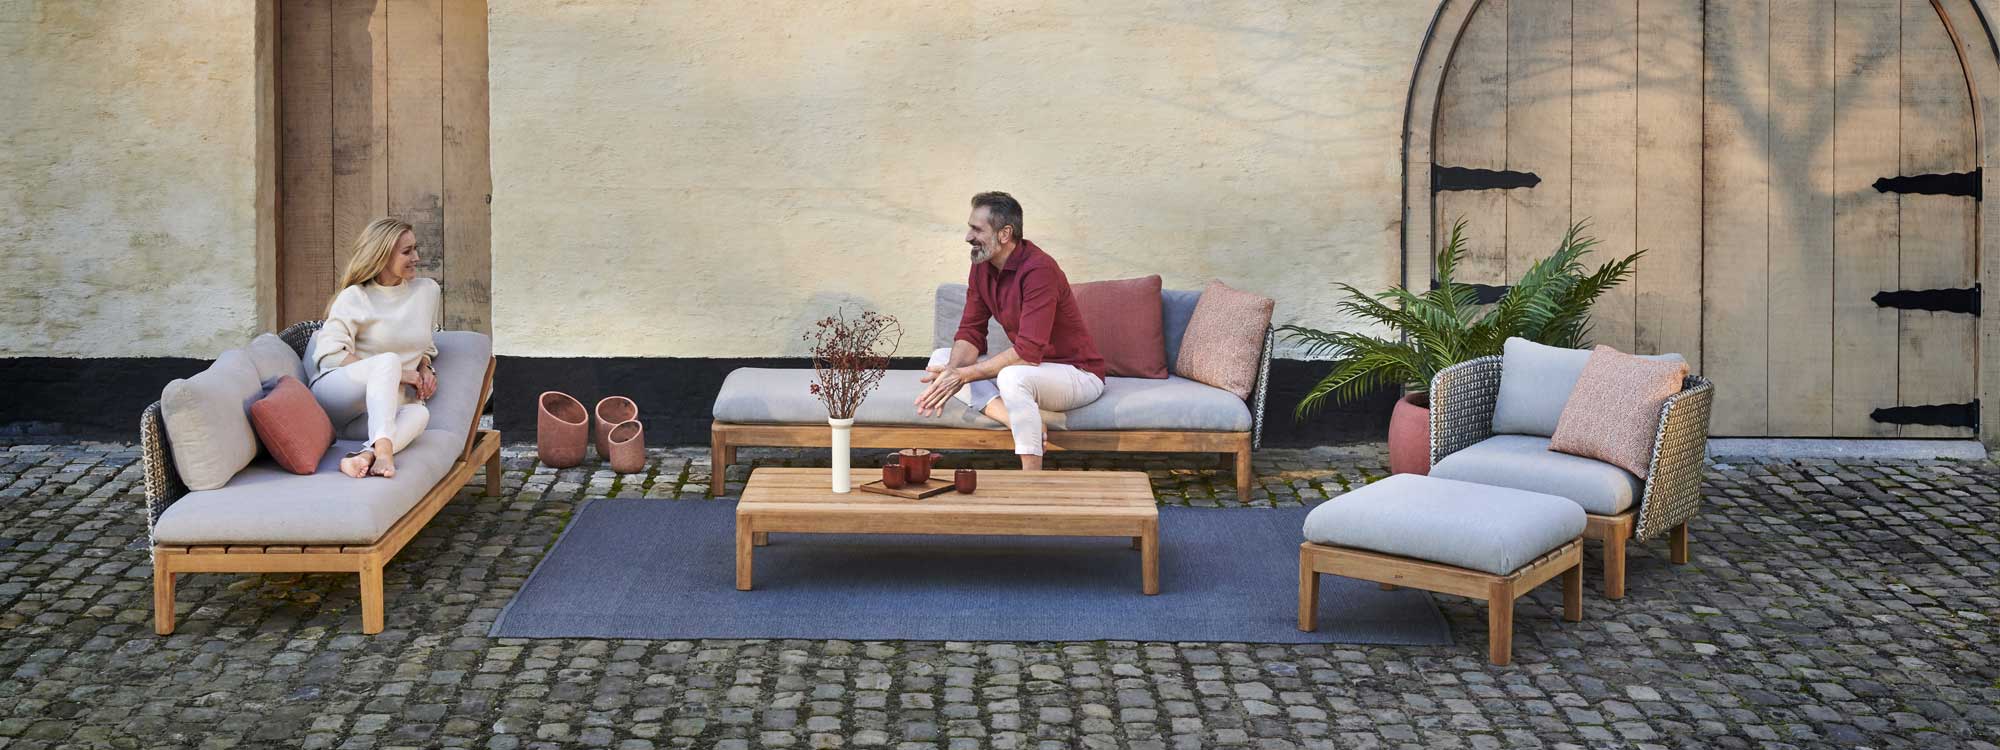 Image of couple chatting on Calpyso garden lounge furniture by Royal Botania in cobbled courtyard